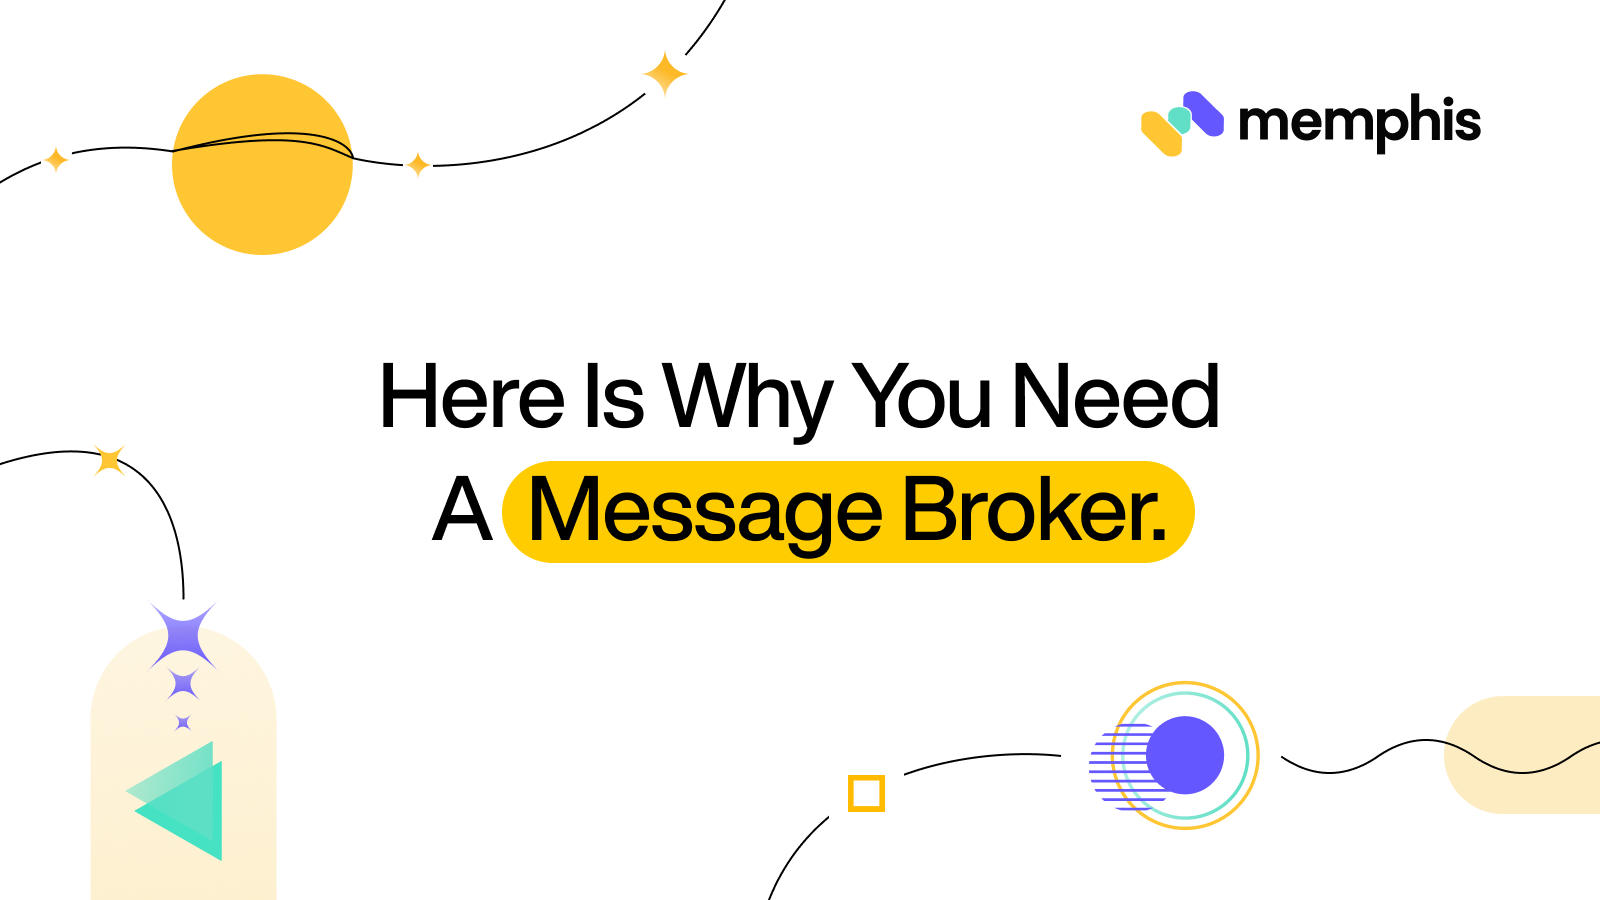 Here is Why You Need a Message Broker